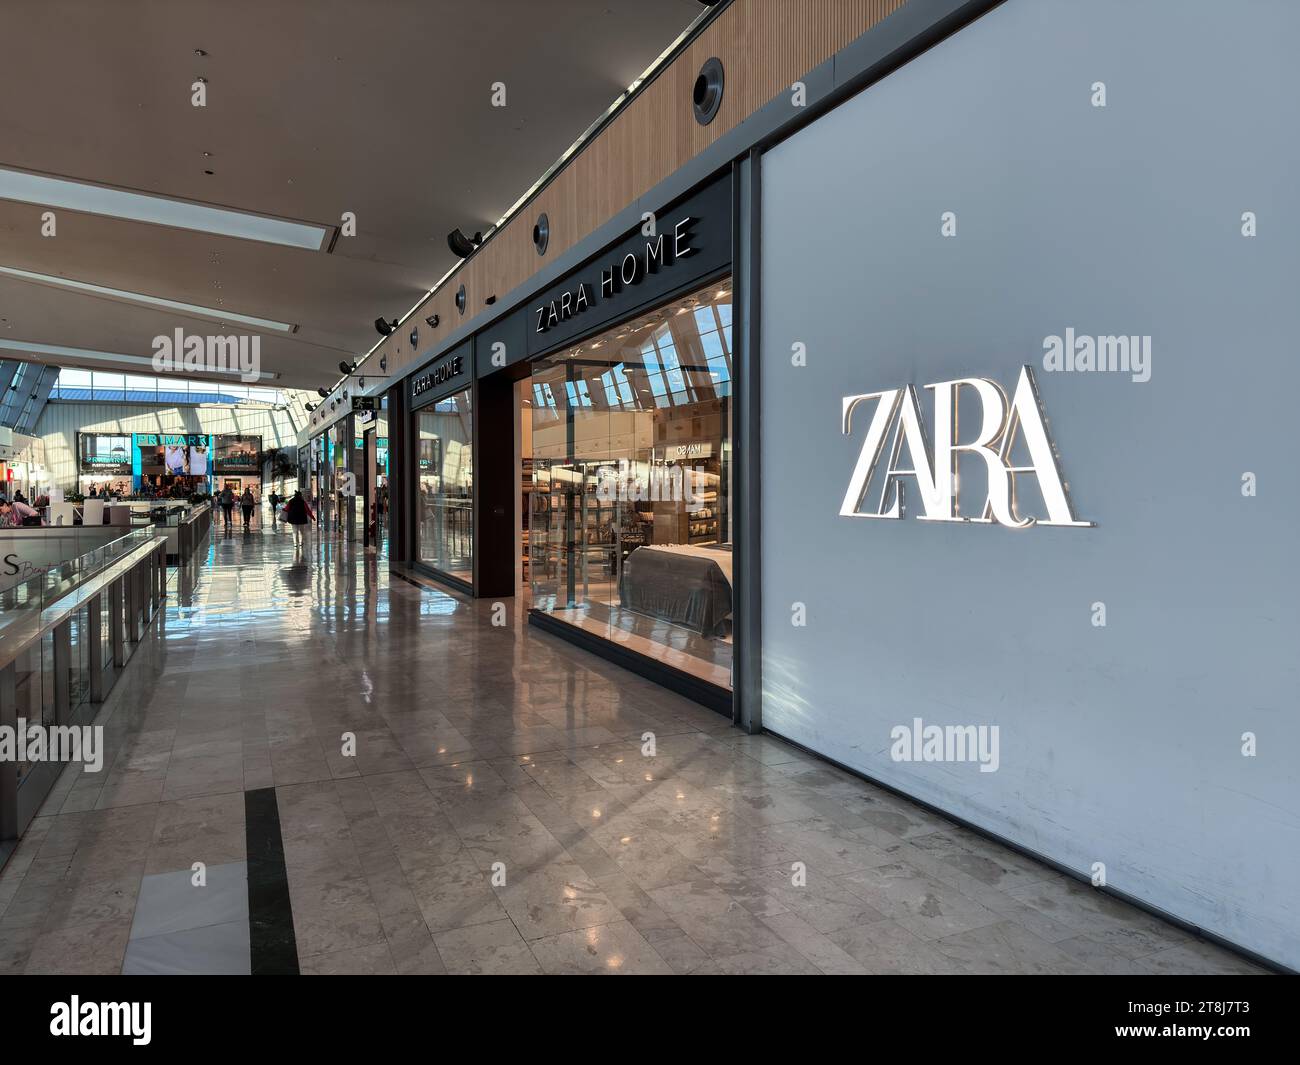 Puerto Venecia, well-recognized shopping center based out of the city of Zaragoza, Spain. Stock Photo